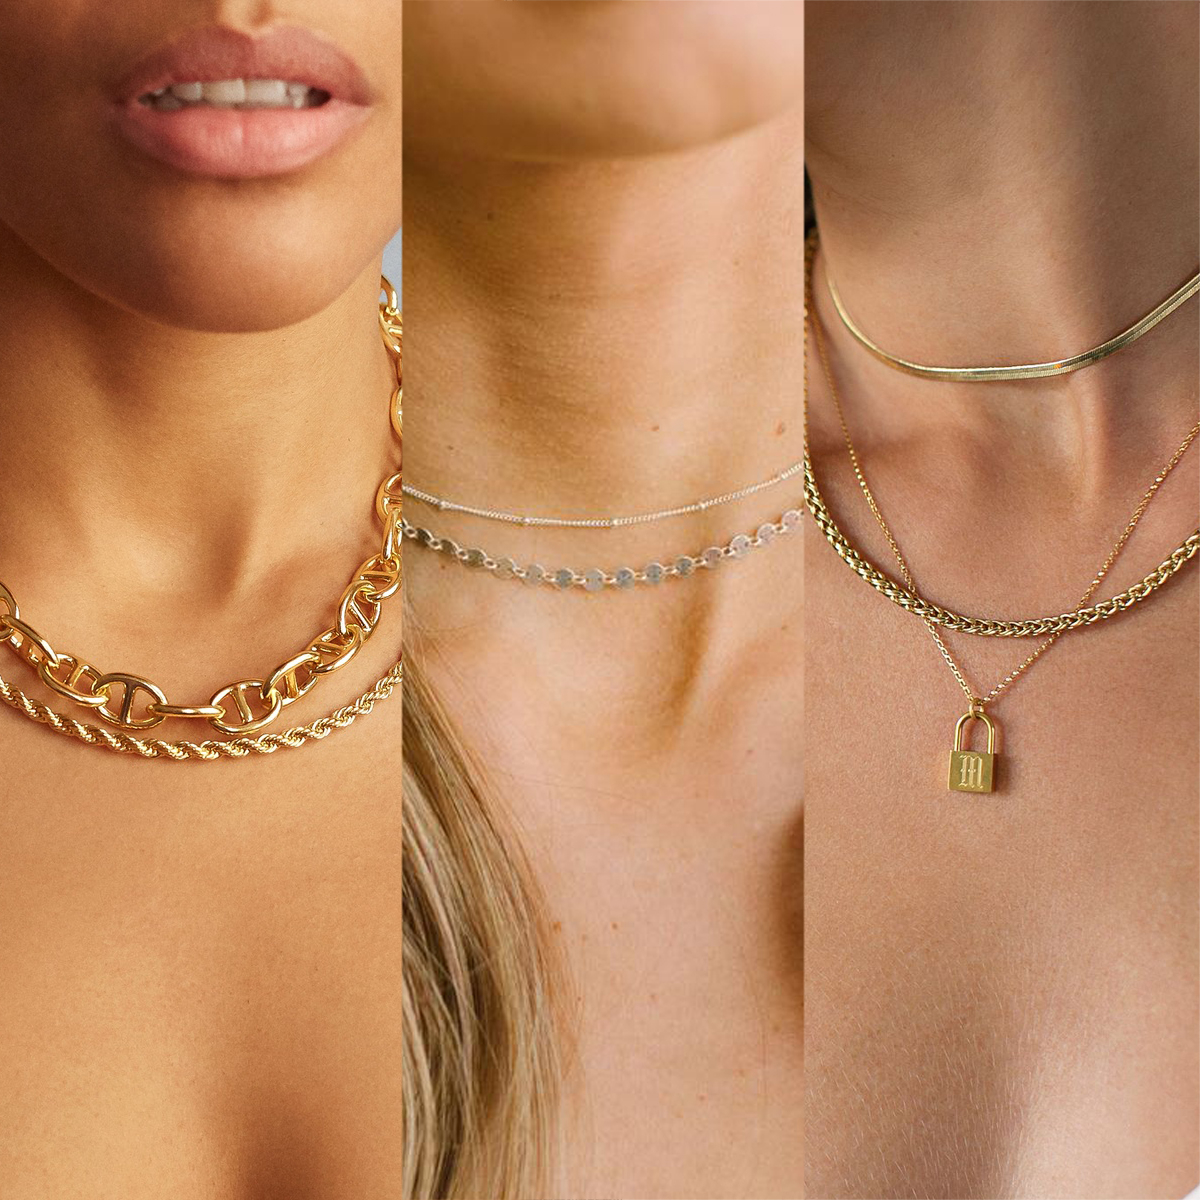 How to Layer Necklaces: Best New Chains, Chokers and More